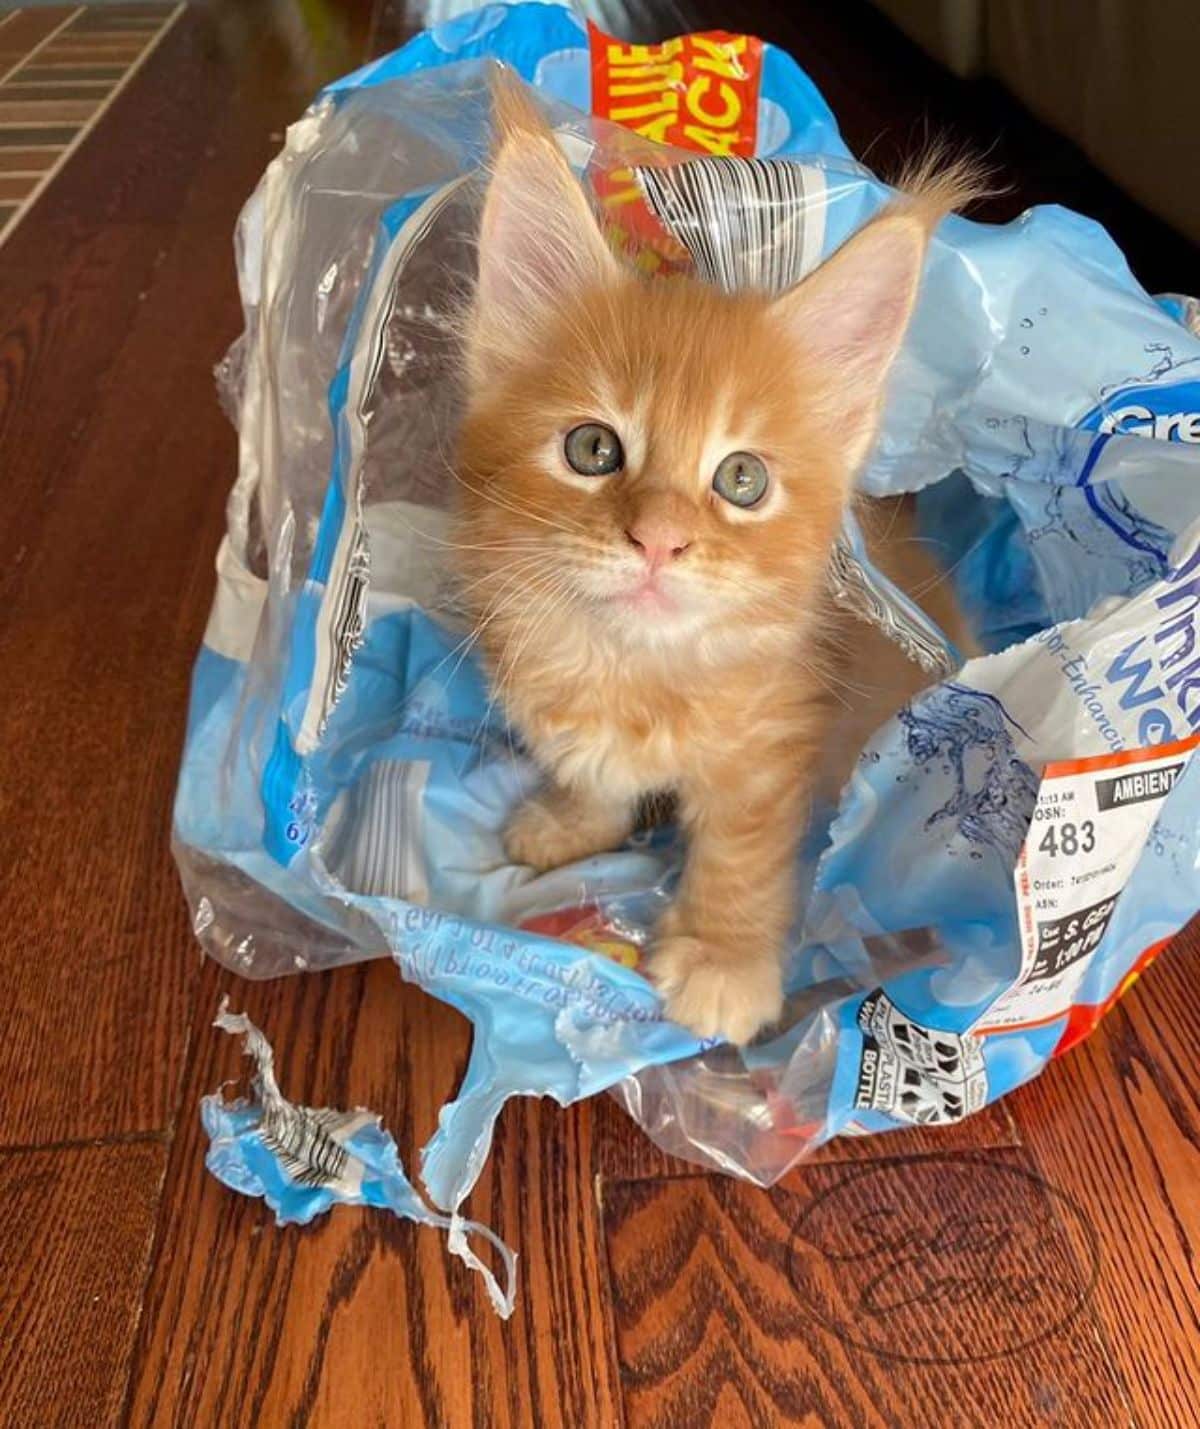 A cute ginger maine coon kitten sitting in a plastic package.